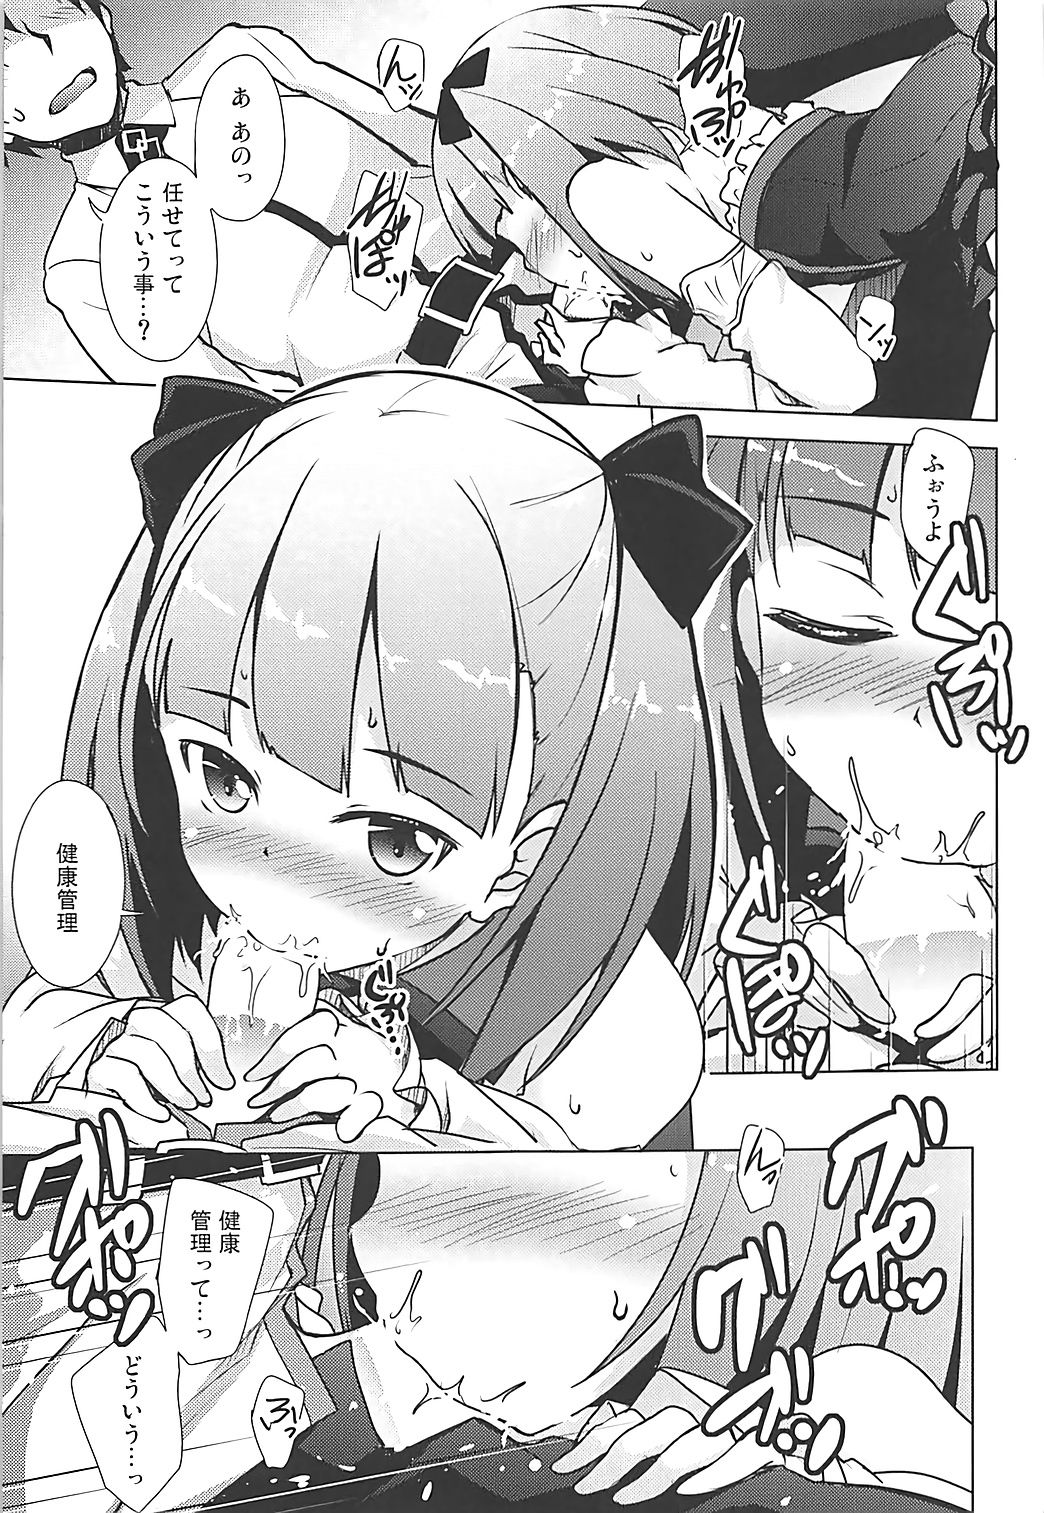 Fate/Grand Order's 2D erotic image of a lolicy girl with Elena Blavatsky 33